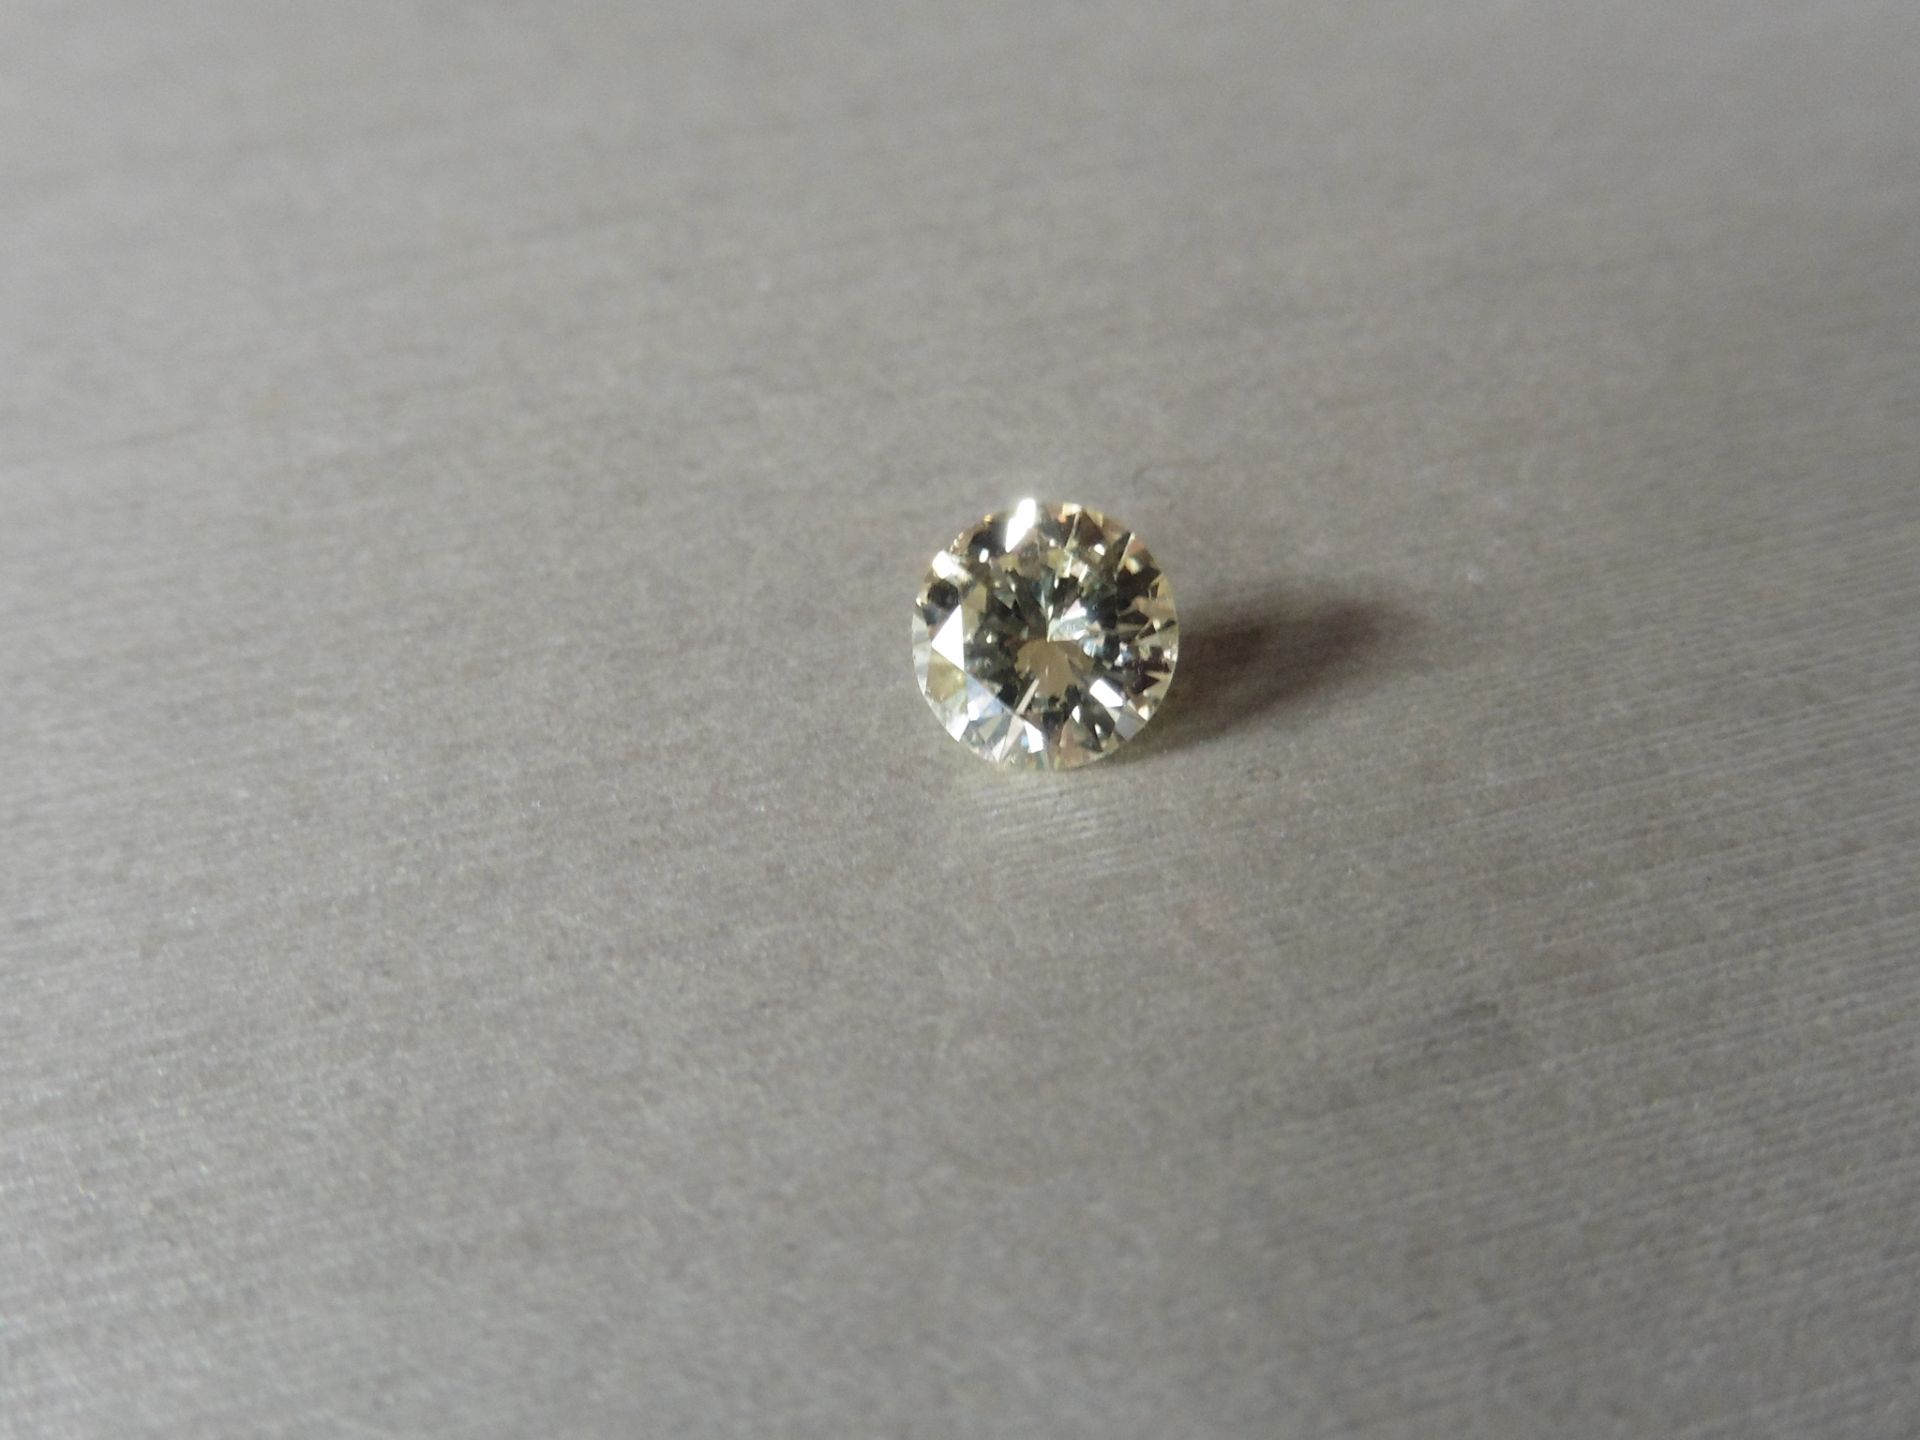 1.08ct loose brilliant cut diamond measuring 6.74 x 3.9mm. K Colour and VS1 clarity. Valued at £ - Image 5 of 6